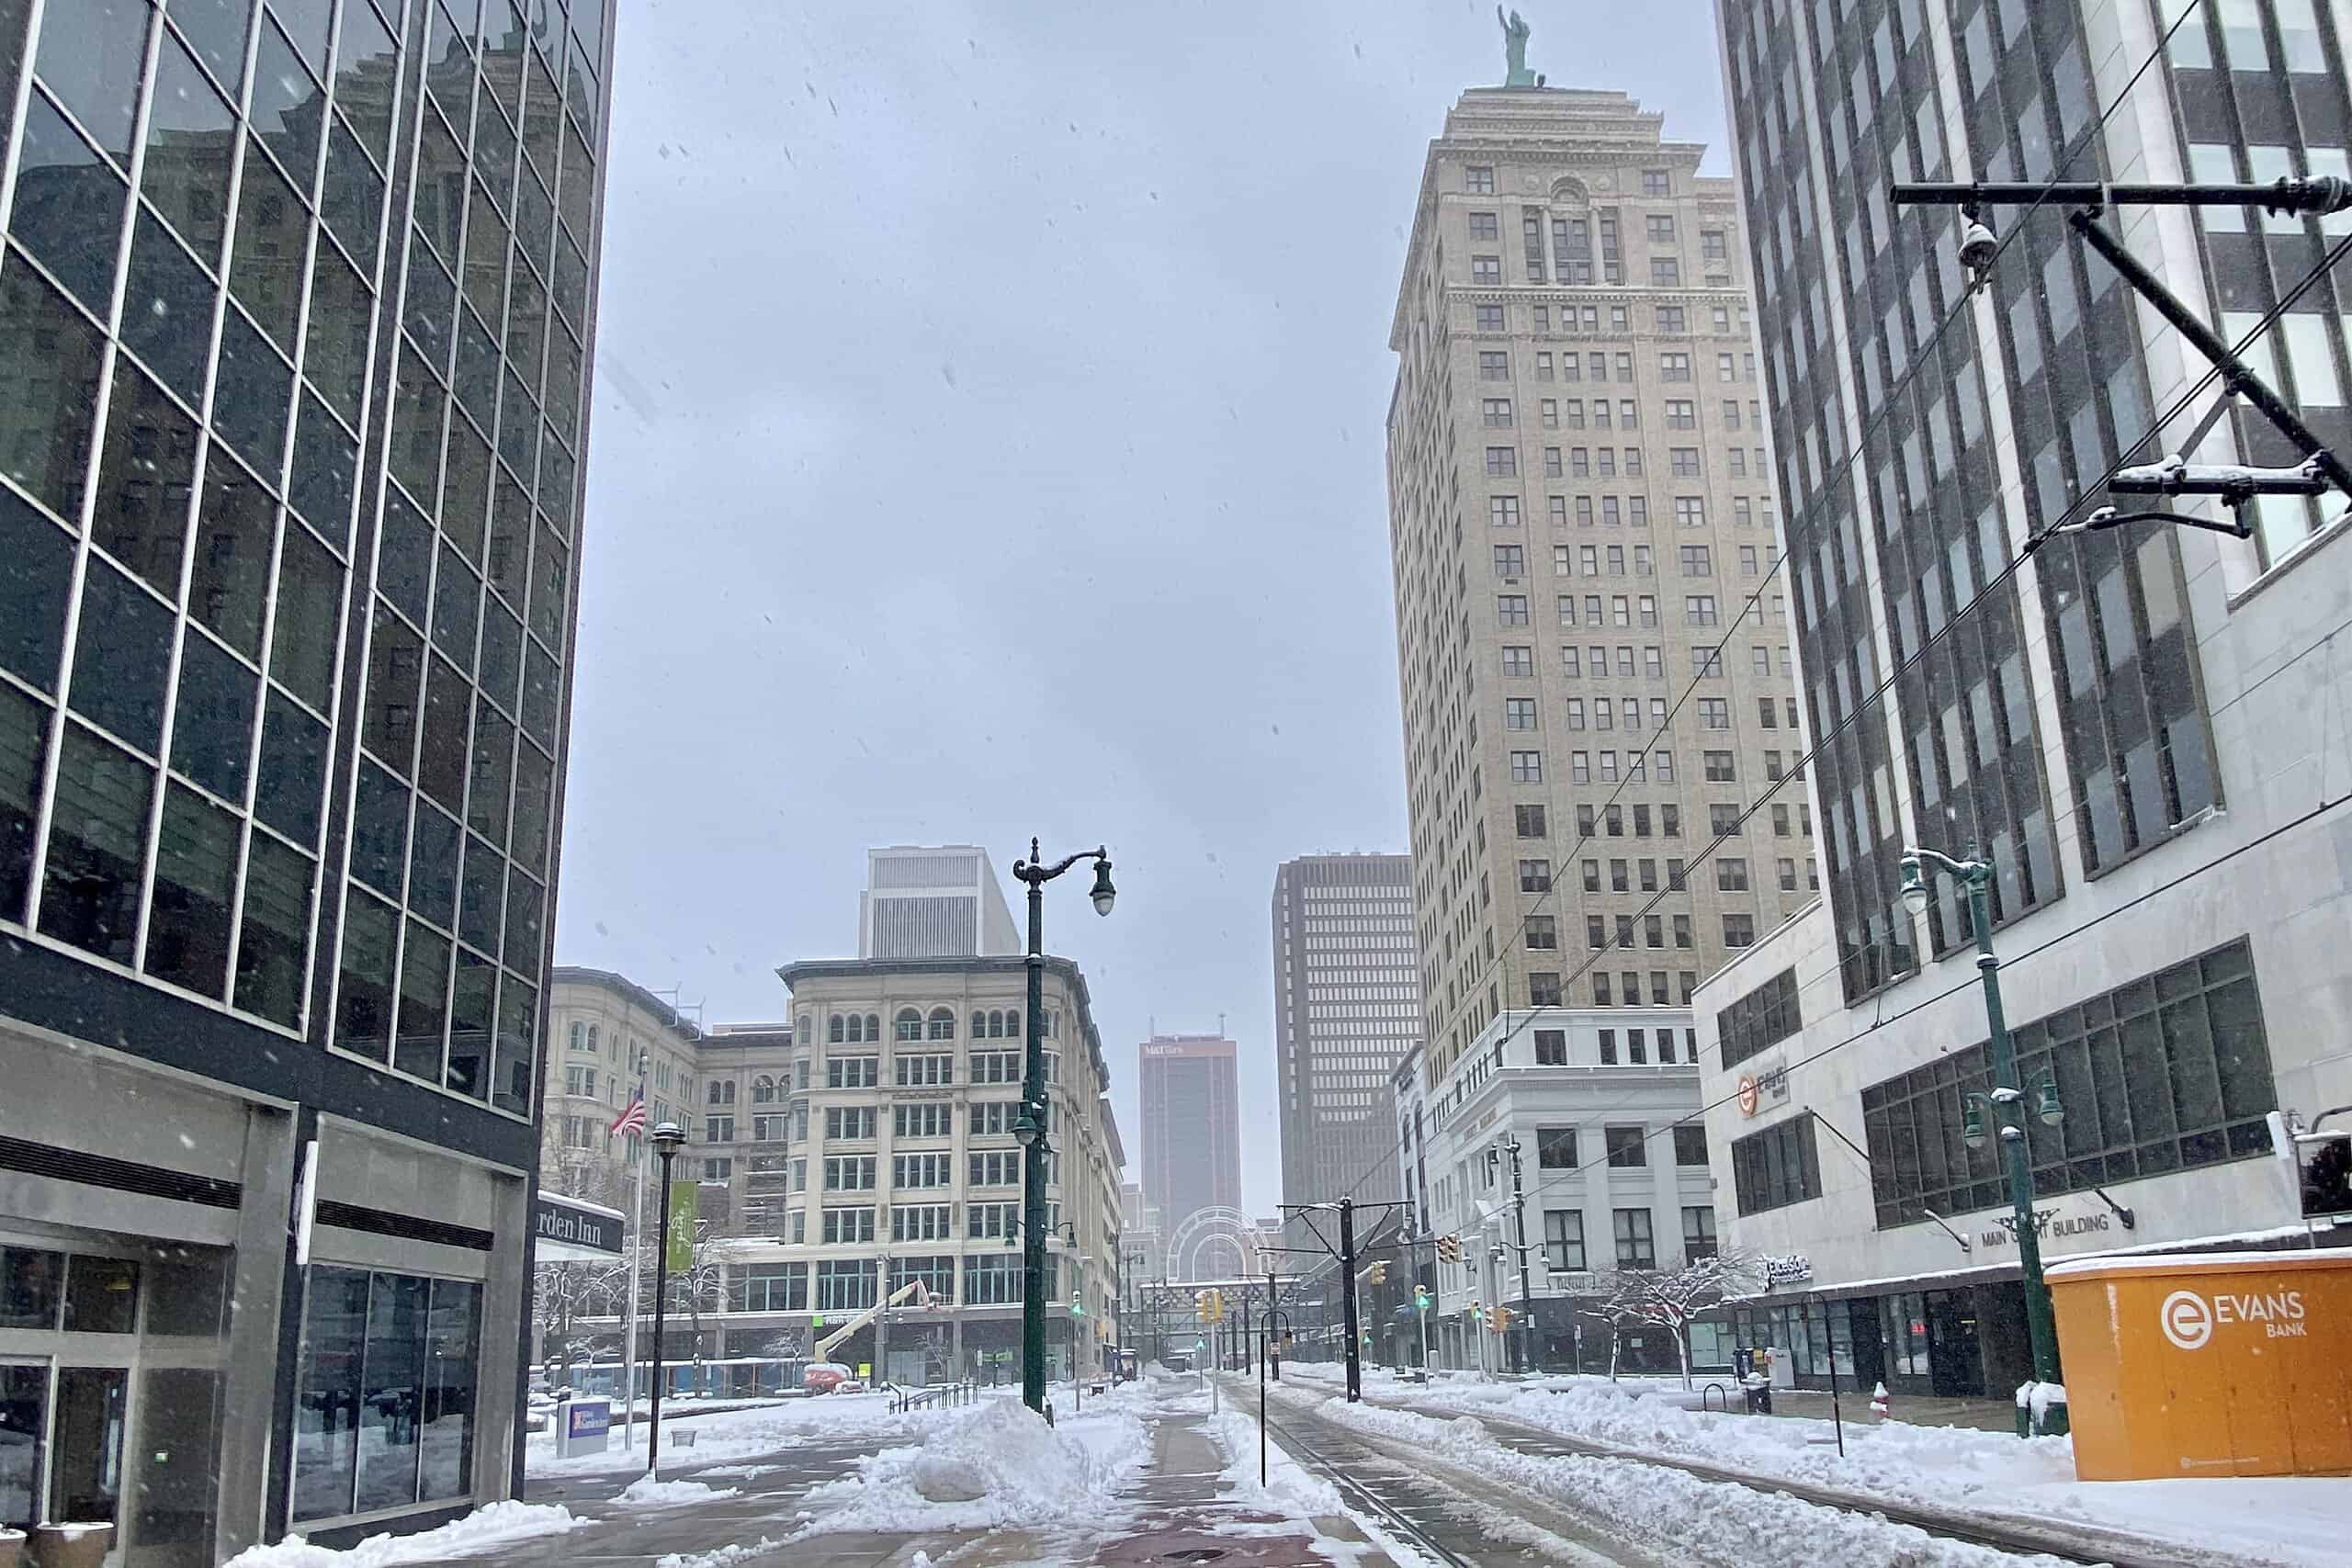 Looking southward along Main Street from just before Lafayette Square in downtown Buffalo, New York, on the first day of a two-day November 2022 winter storm